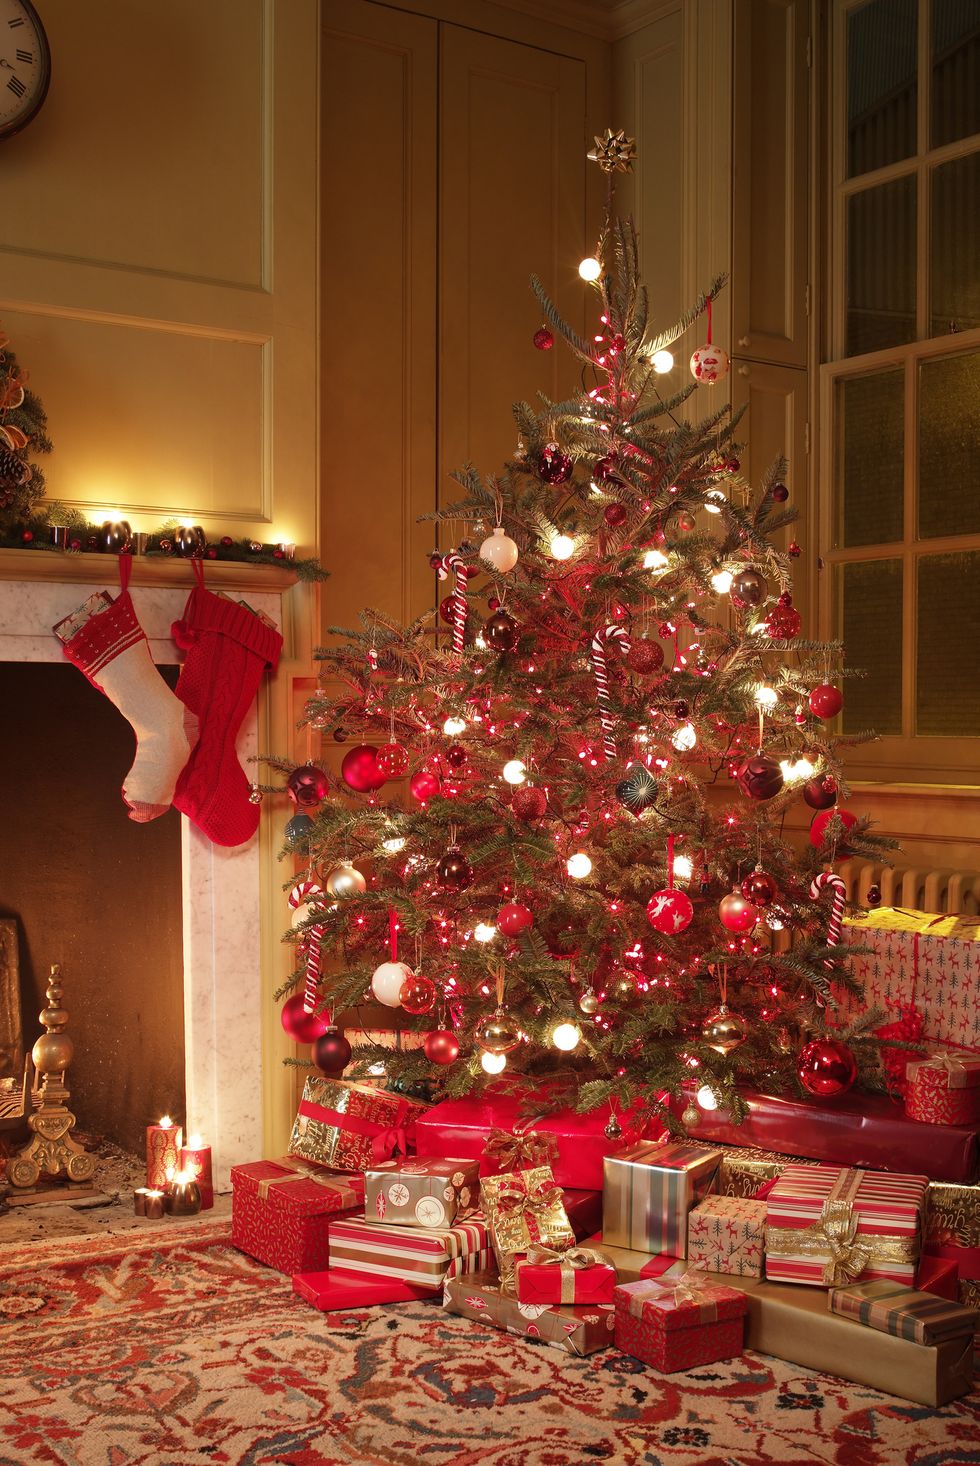 How To Decorate Your Christmas Tree This Holiday Season